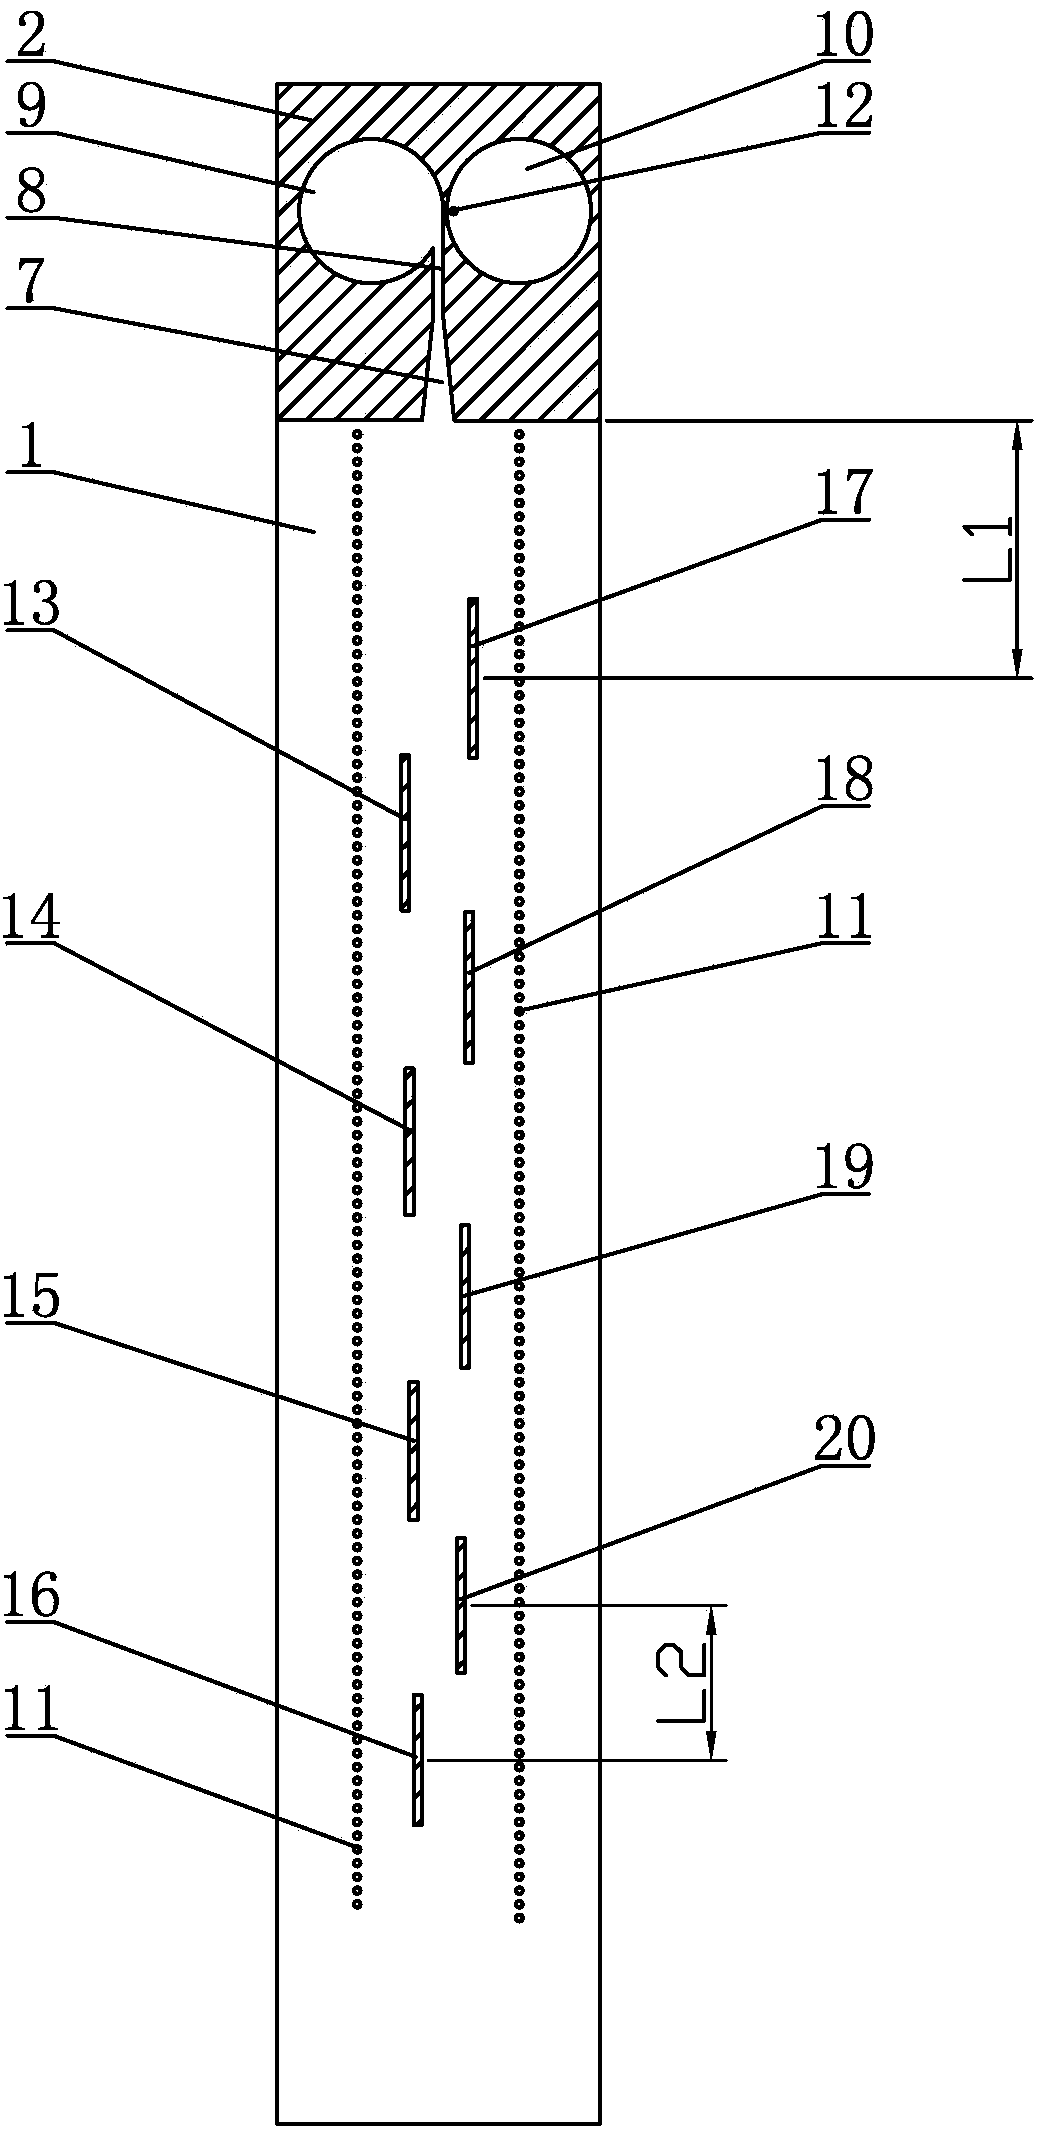 Seam-variable large-bandwidth traveling wave seam array antenna with radiation-type load